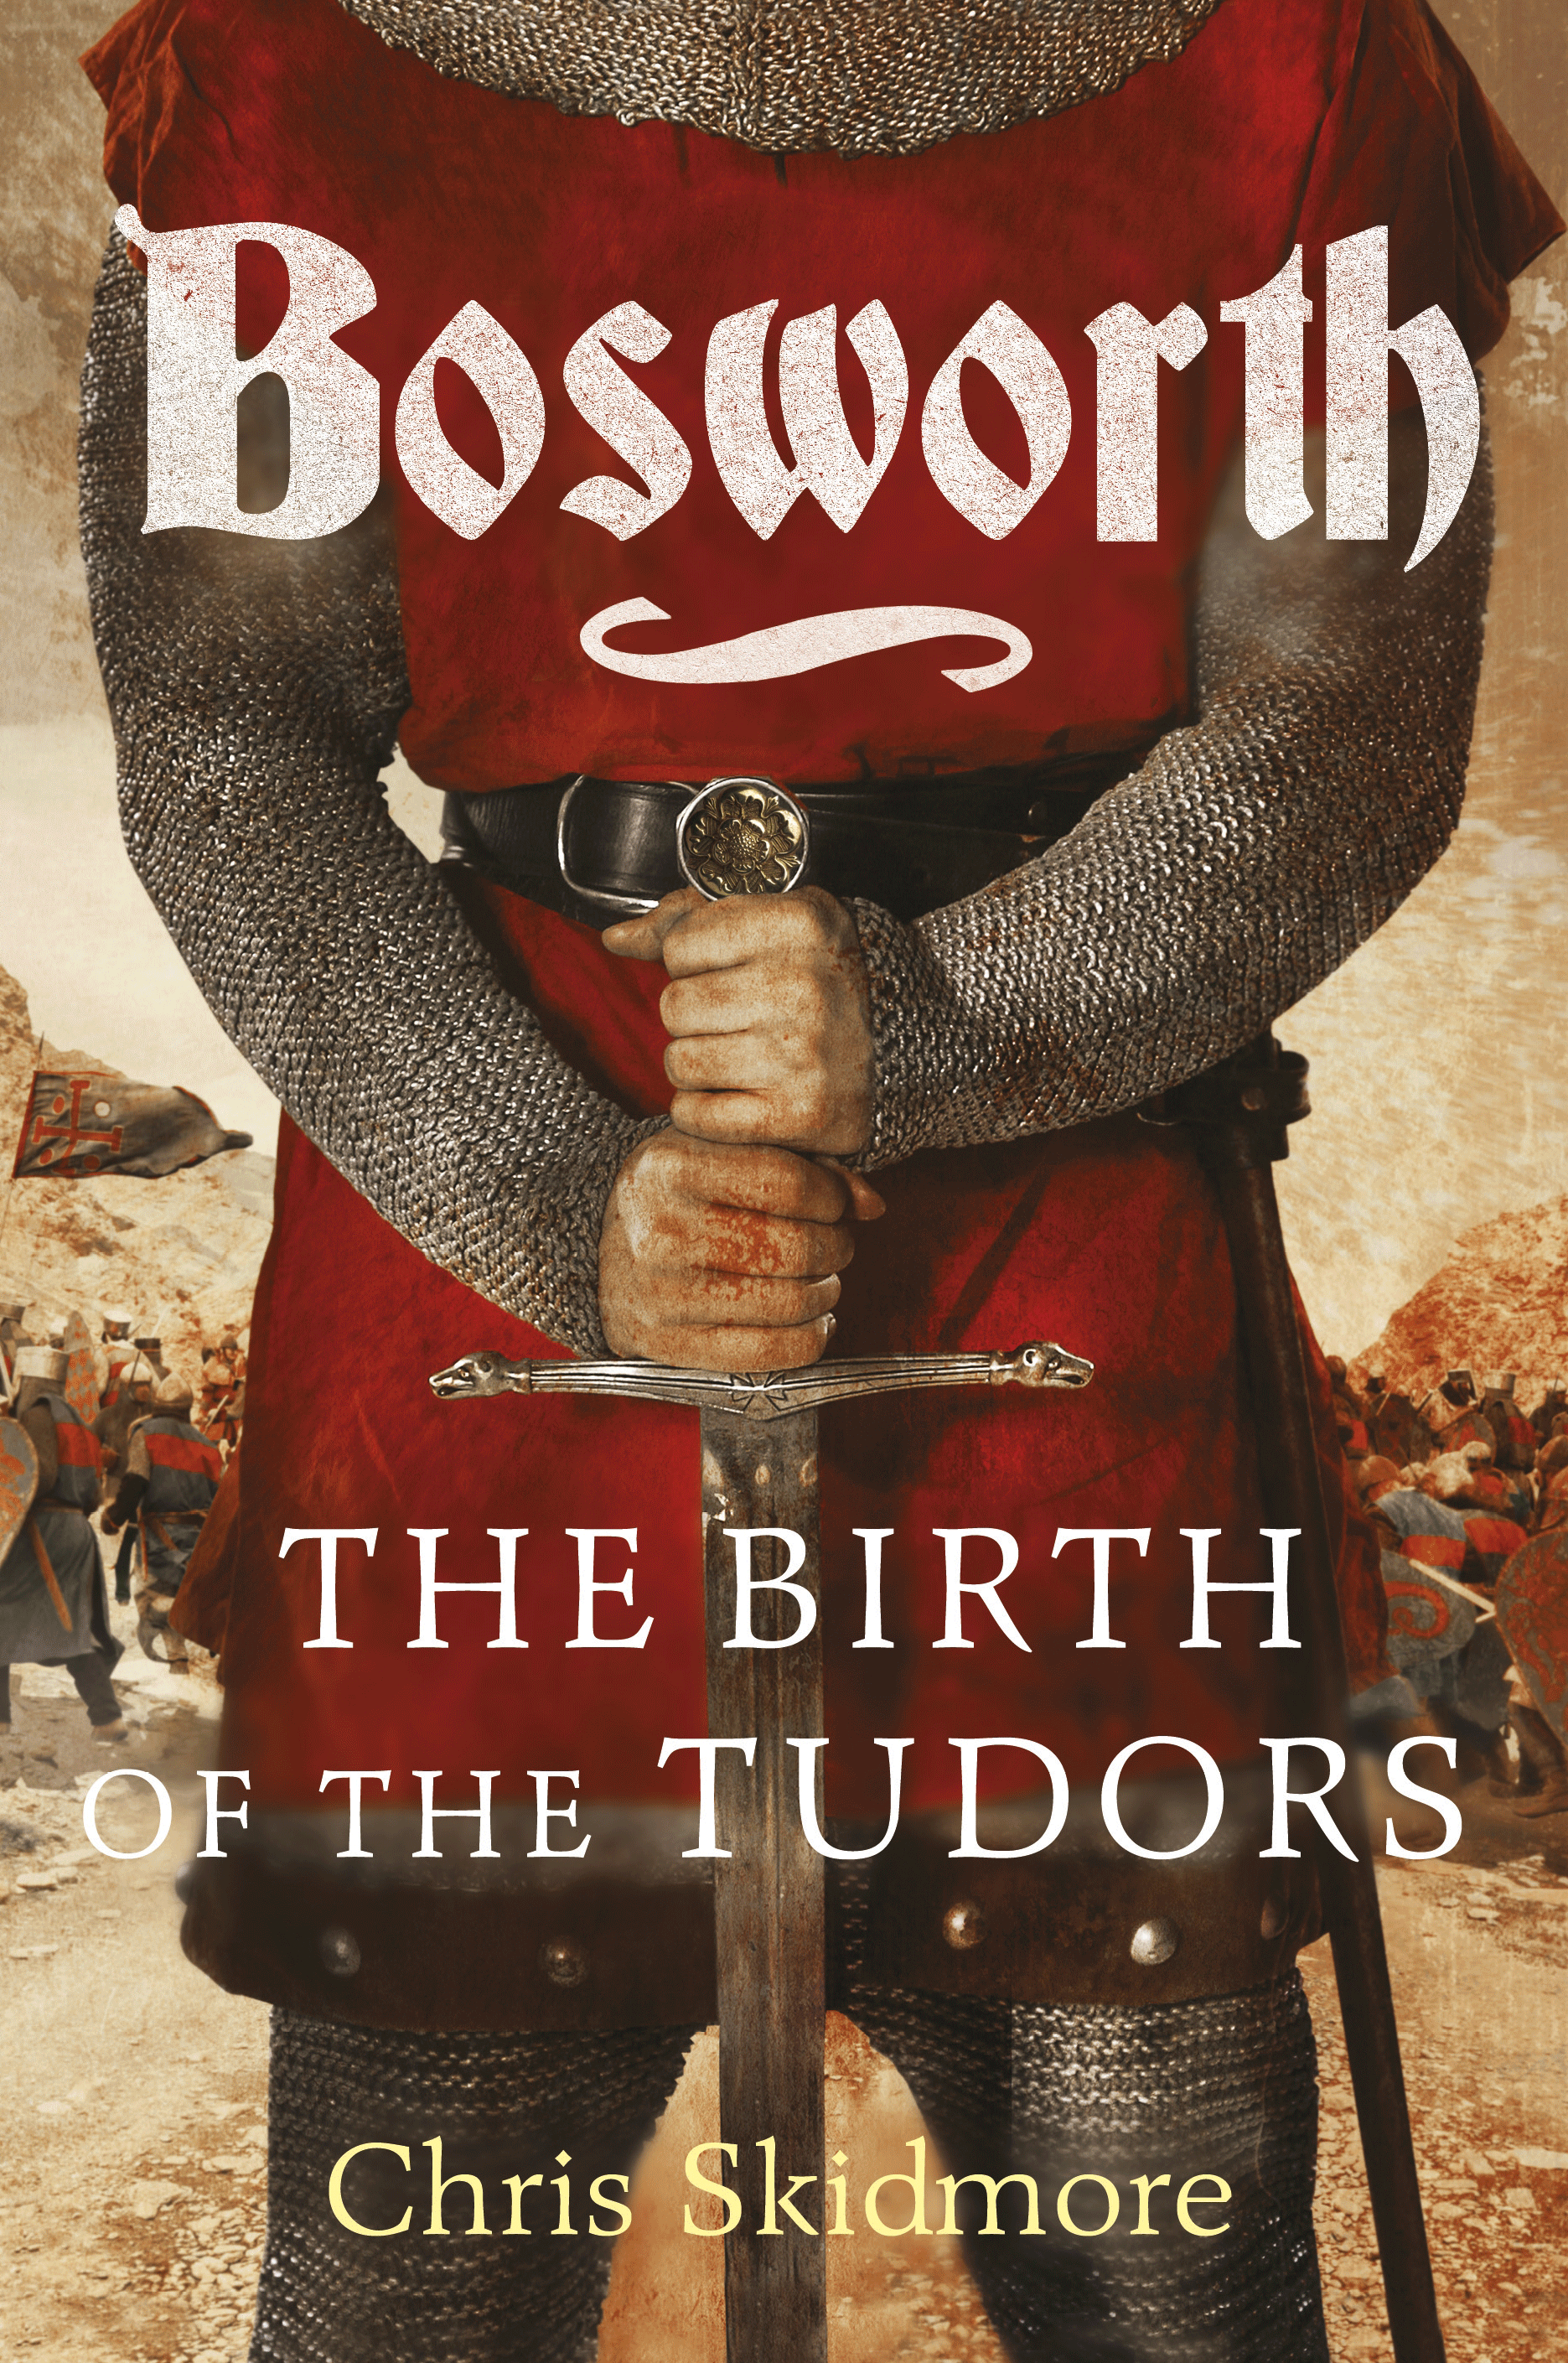 Paperback of Bosworth: The Birth of The Tudors out 5 June